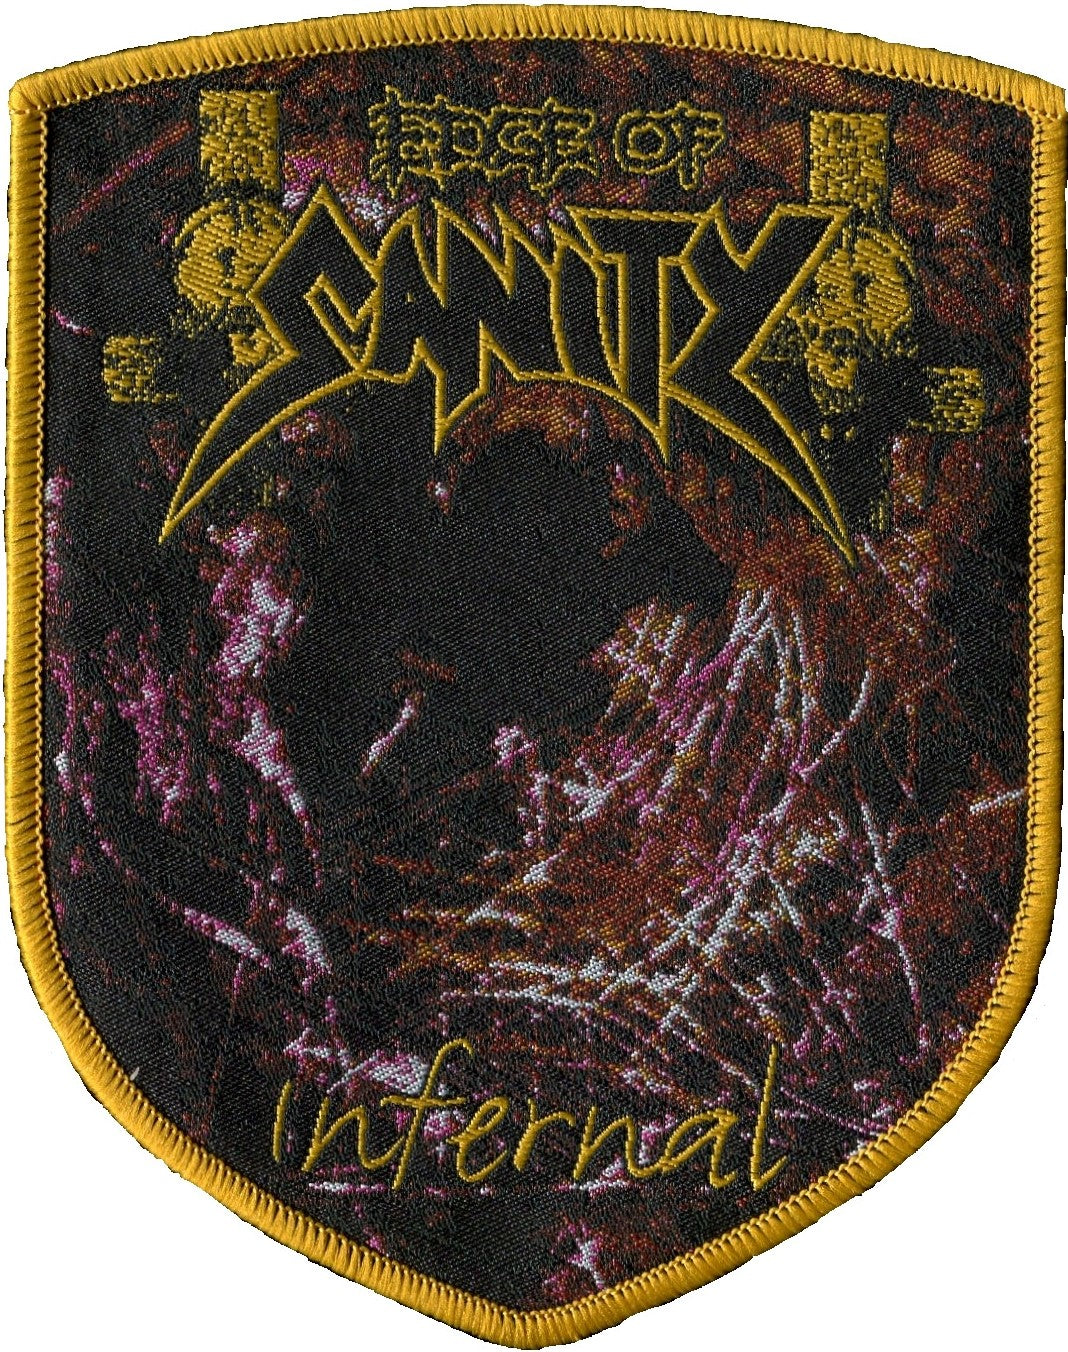 Edge of Sanity - Infernal - Patch